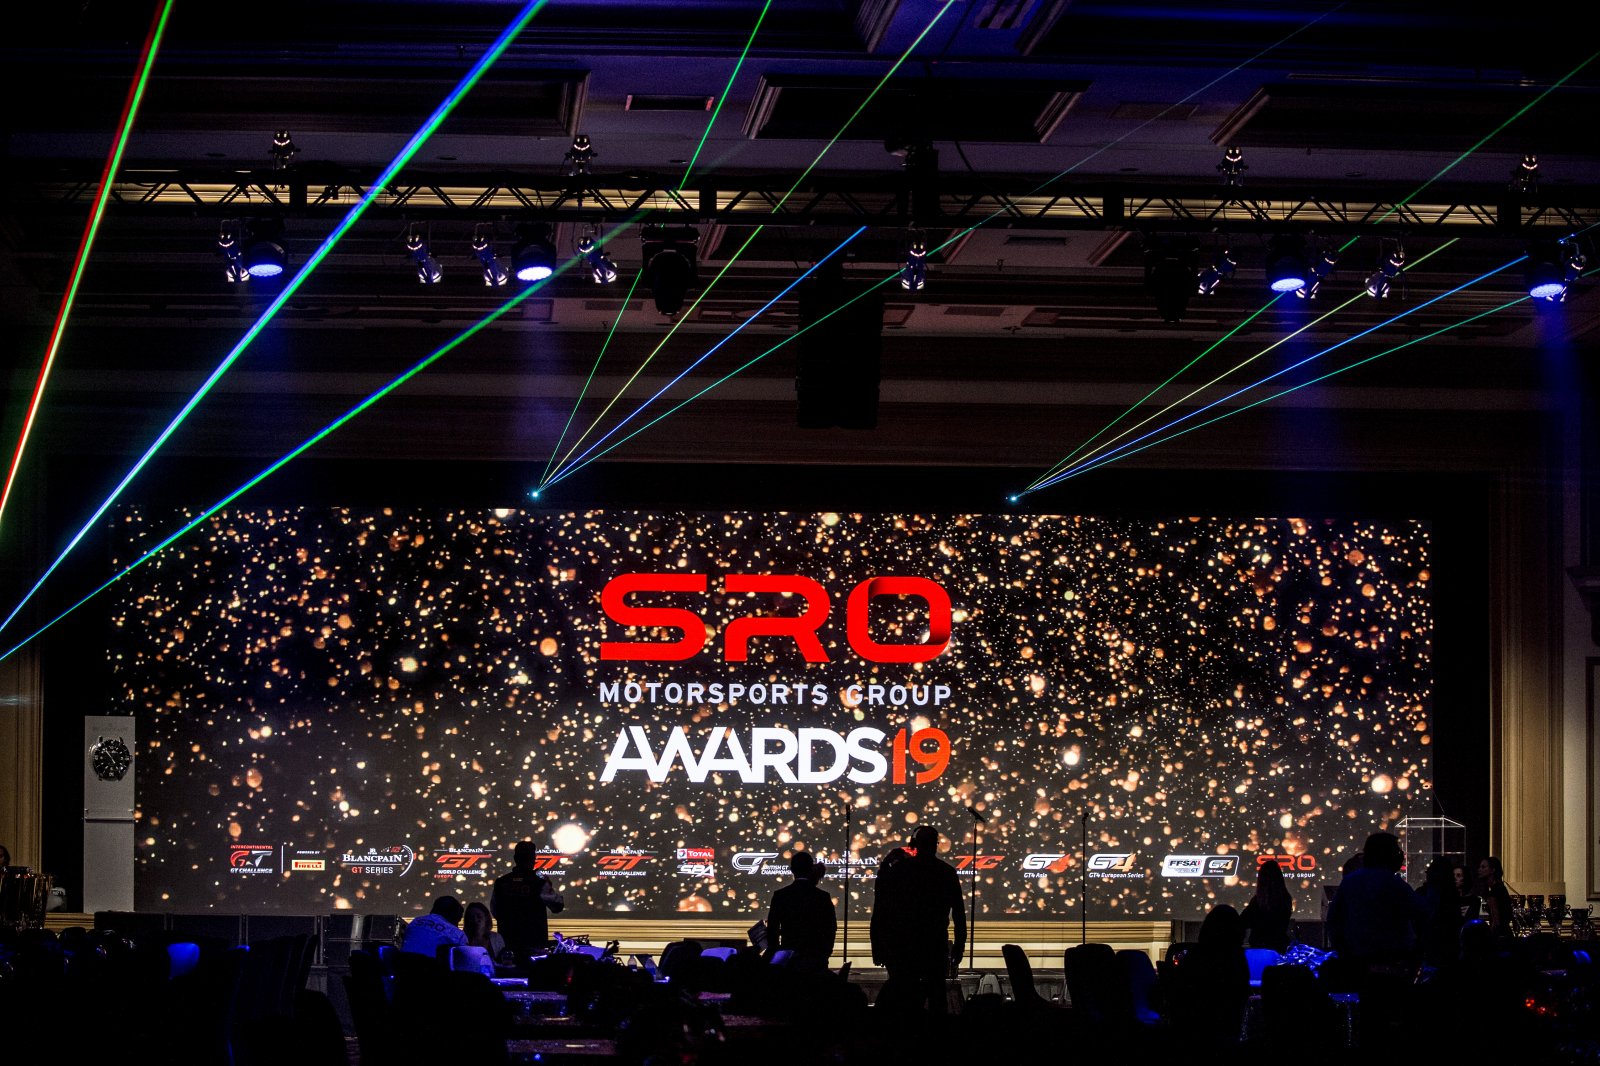 2019 champions celebrated at spectacular SRO Motorsports Group awards ceremony in Las Vegas